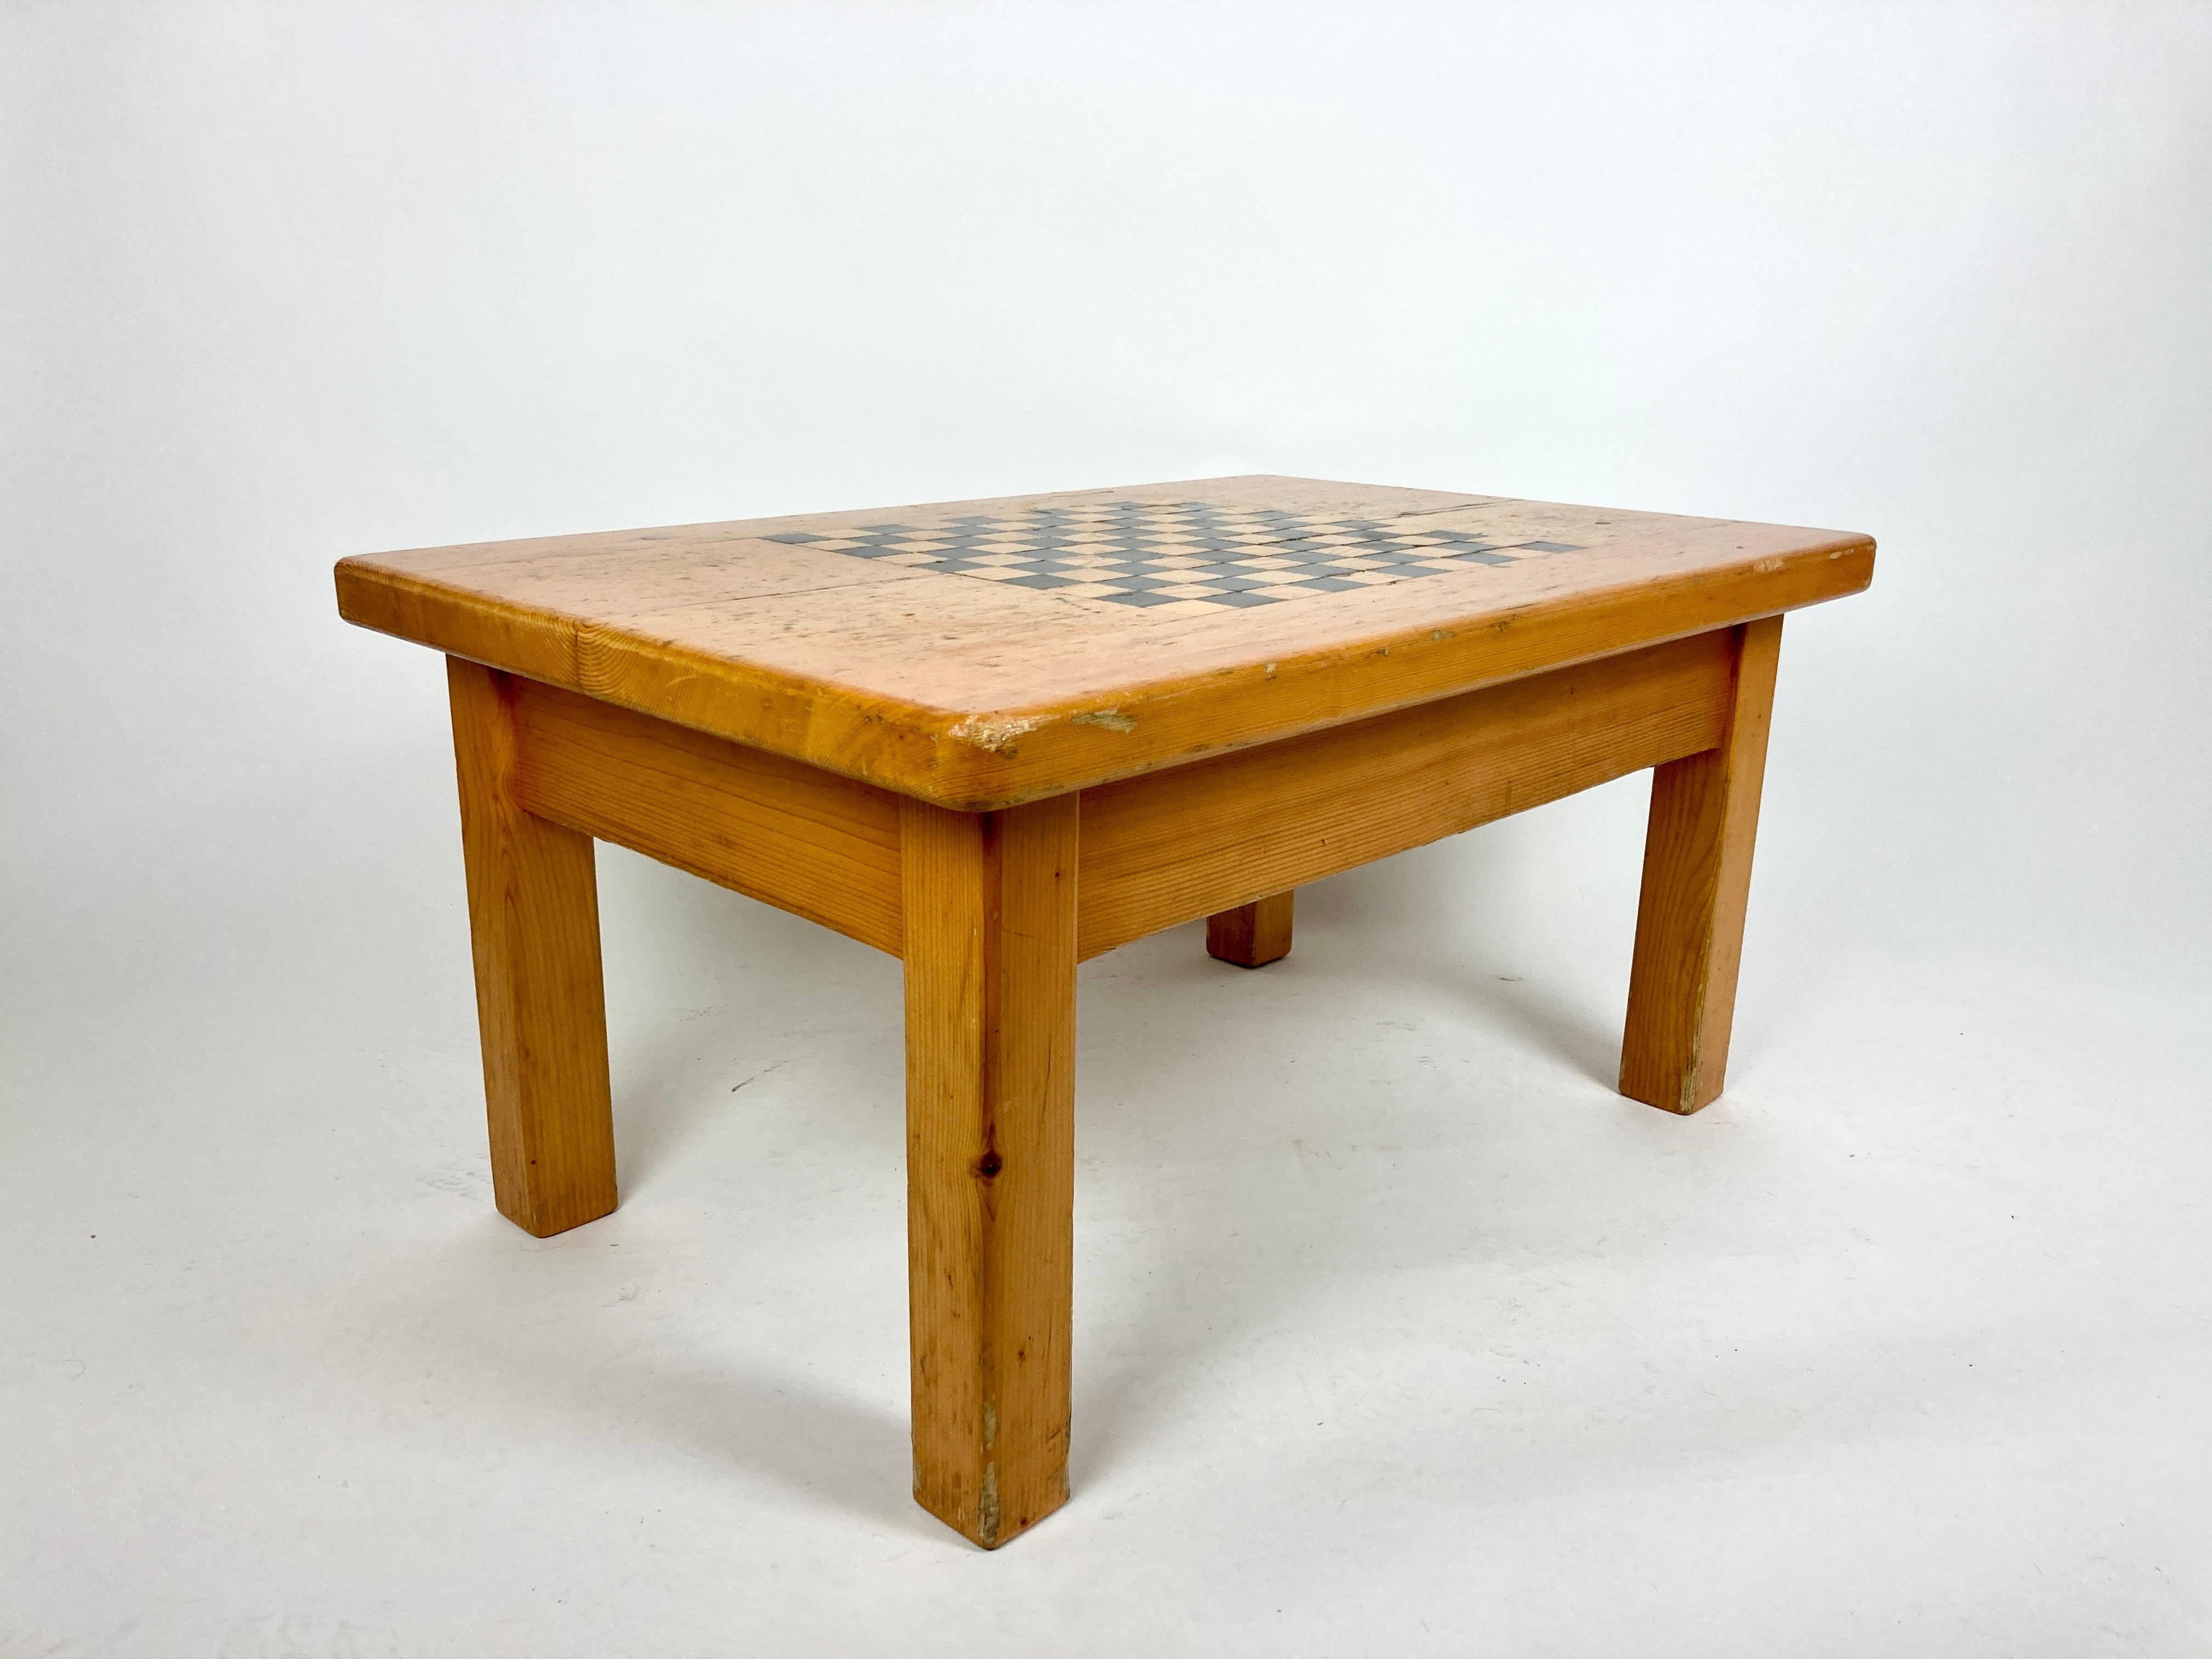 20th Century Vintage French Alpine Chalet Coffee Table with Inlaid Chequer Board